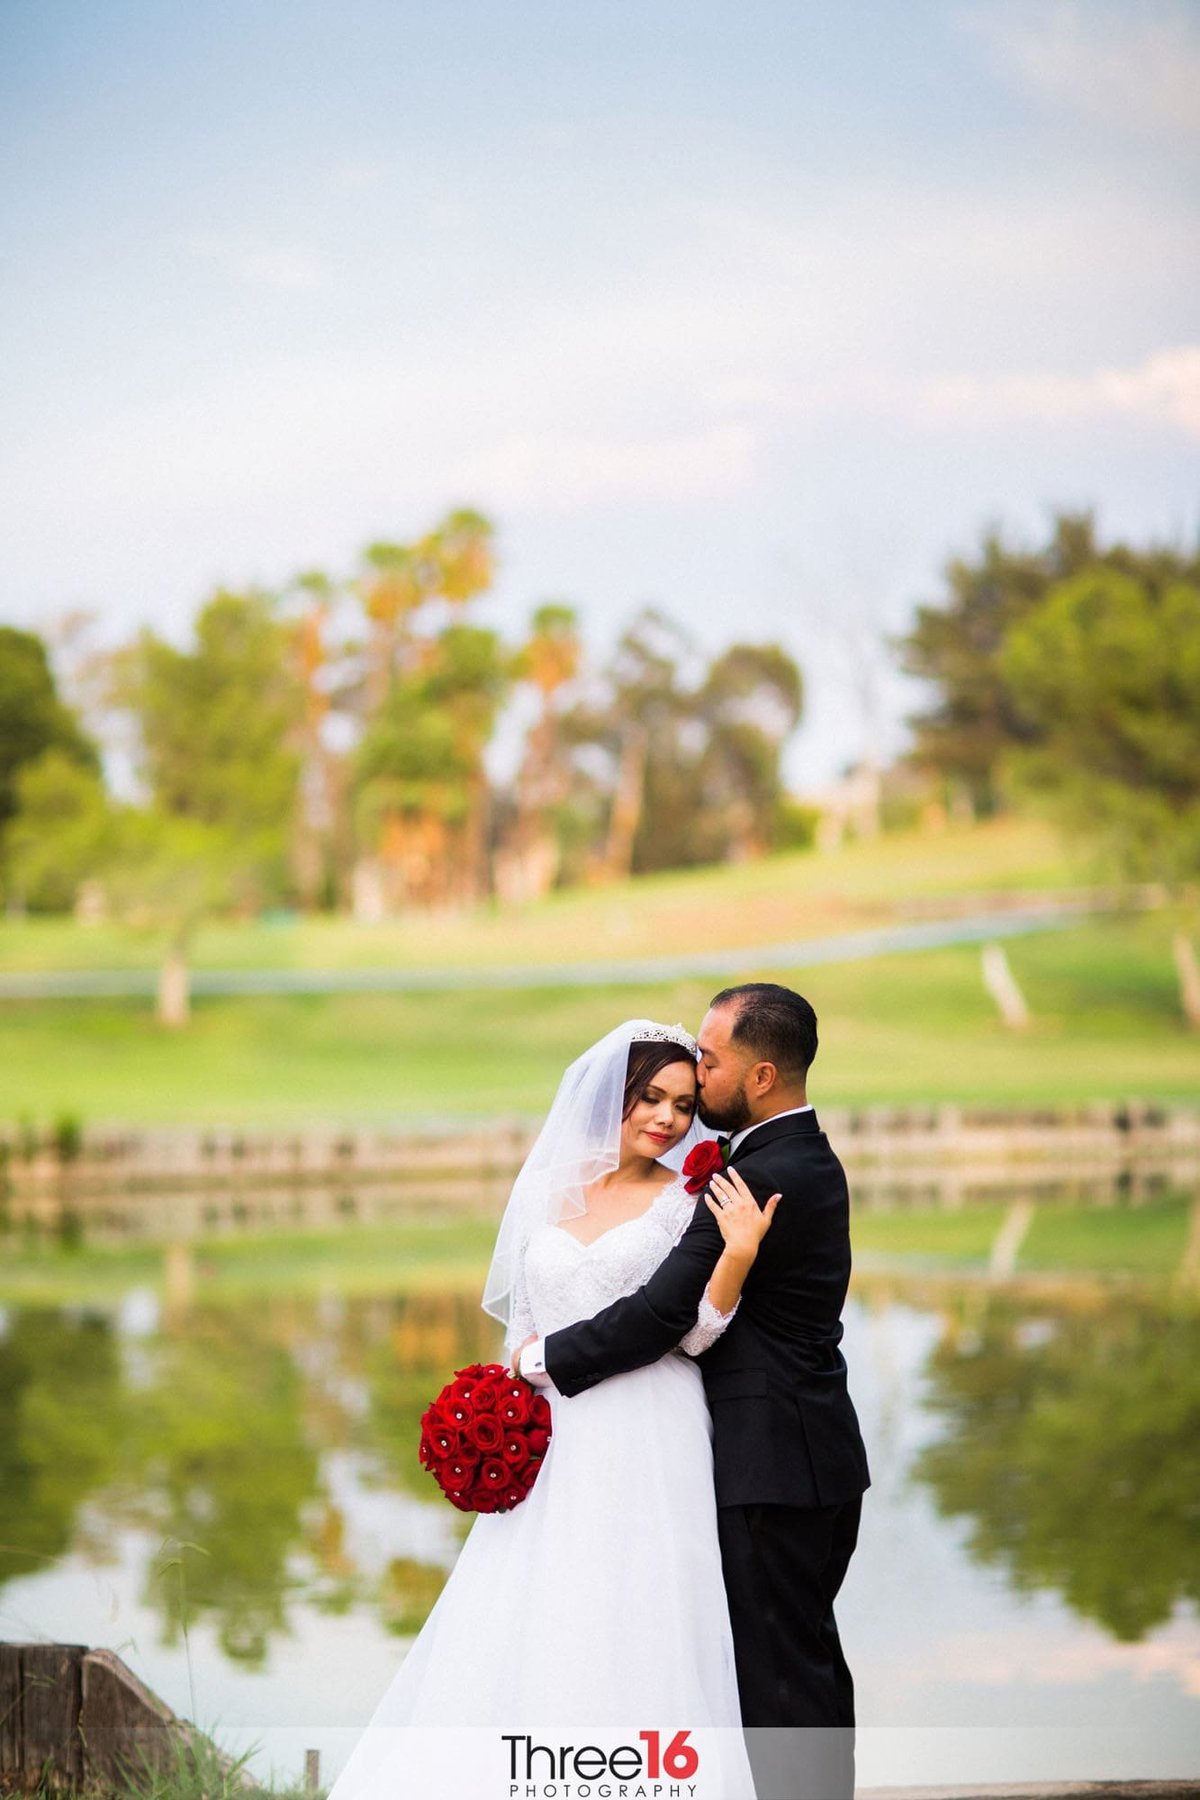 Groom embraces his Bride and kisses her forehead in front of a golf course lake